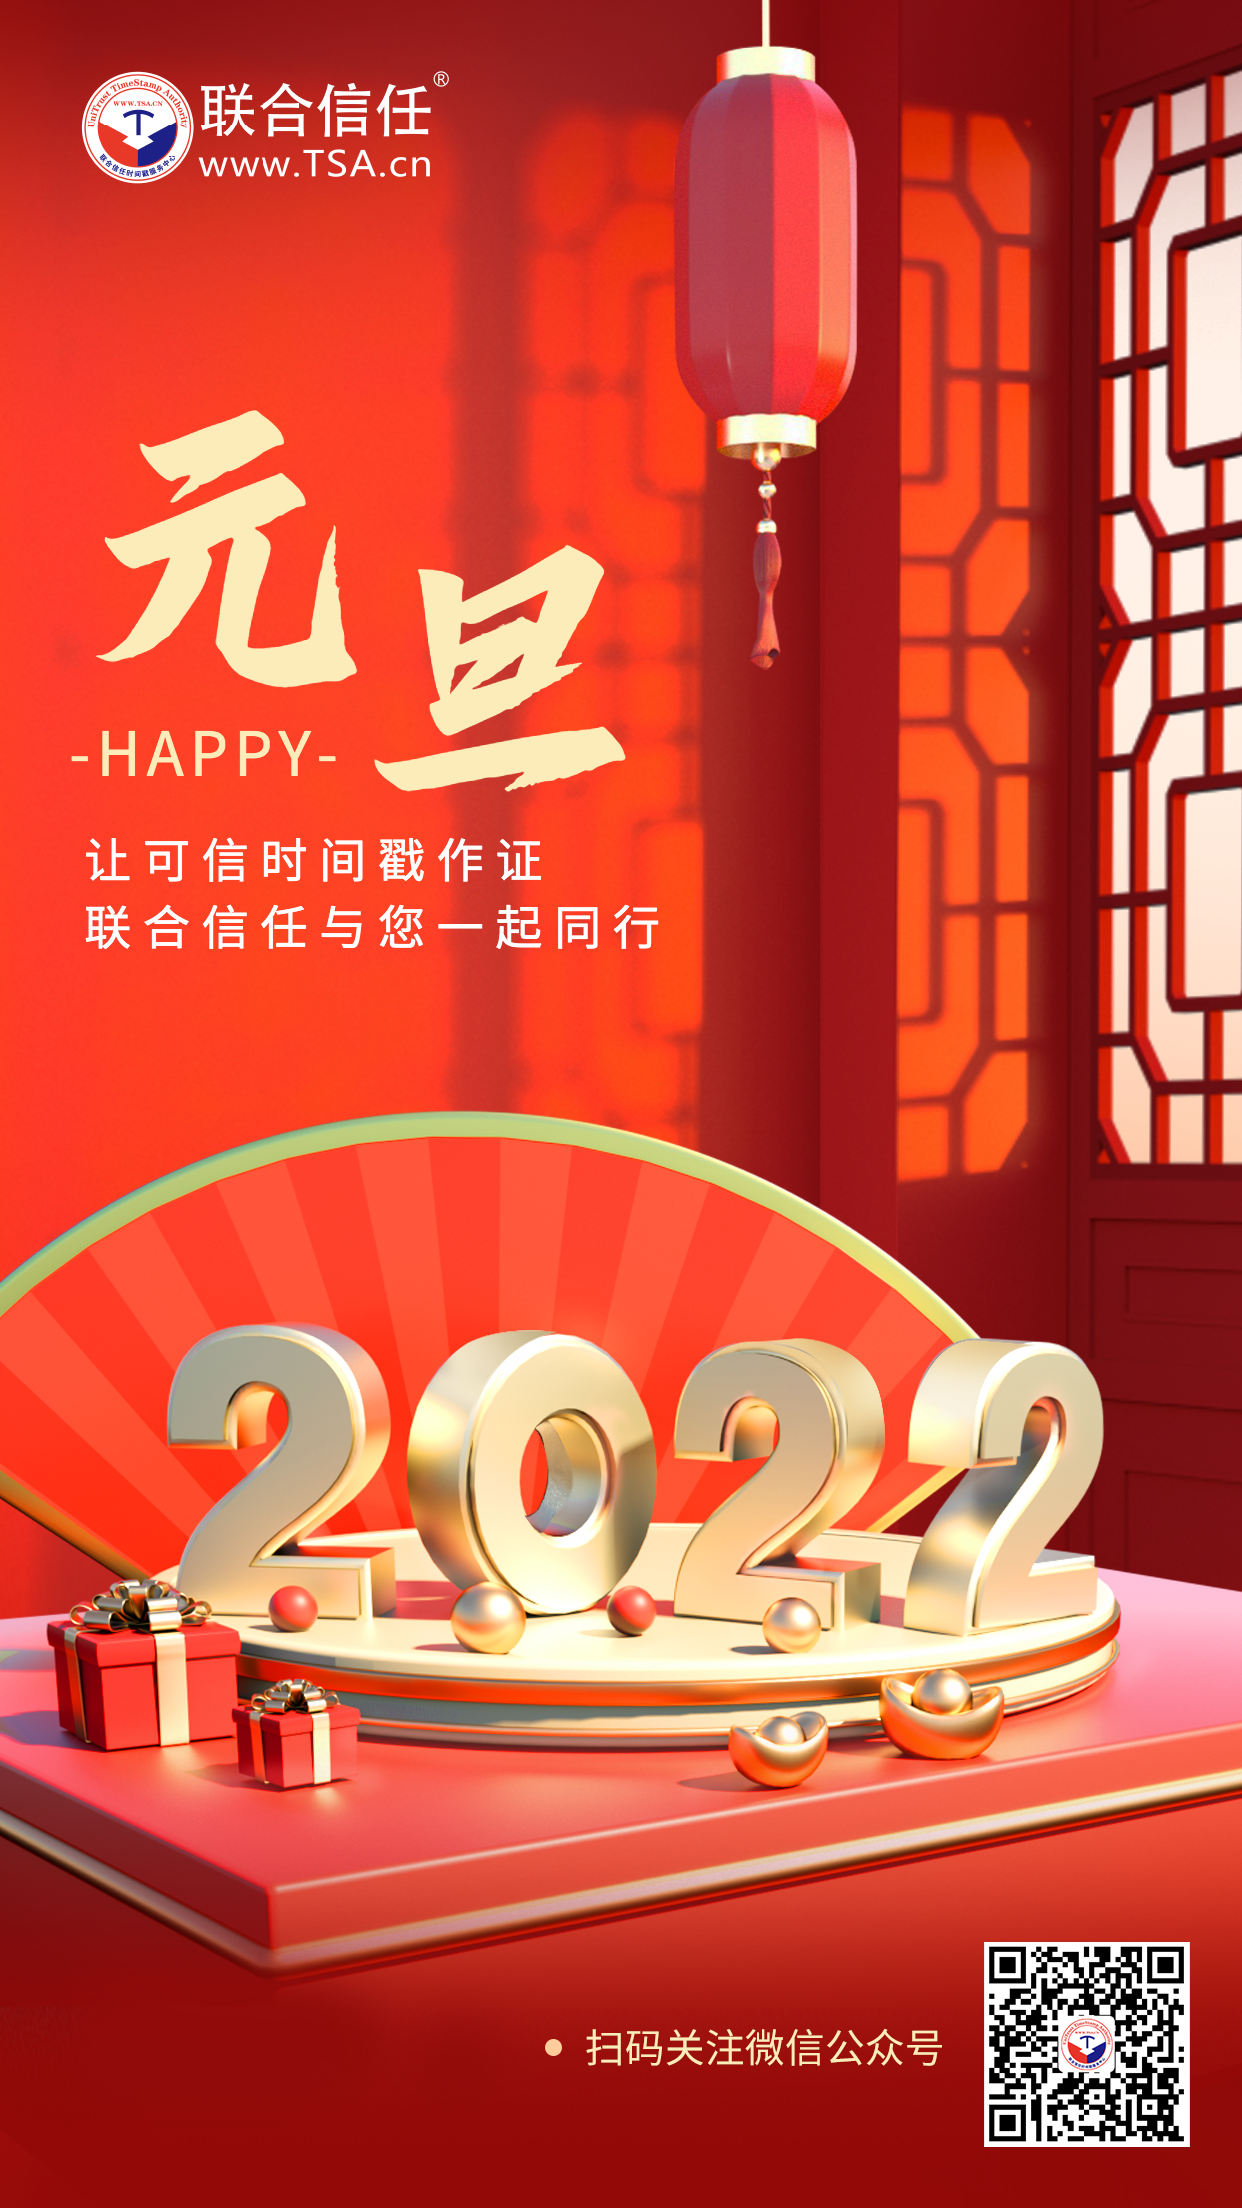 content/banner/d5079f85e6c24be6bcd07e03a9107f4c/新年手机海报.png